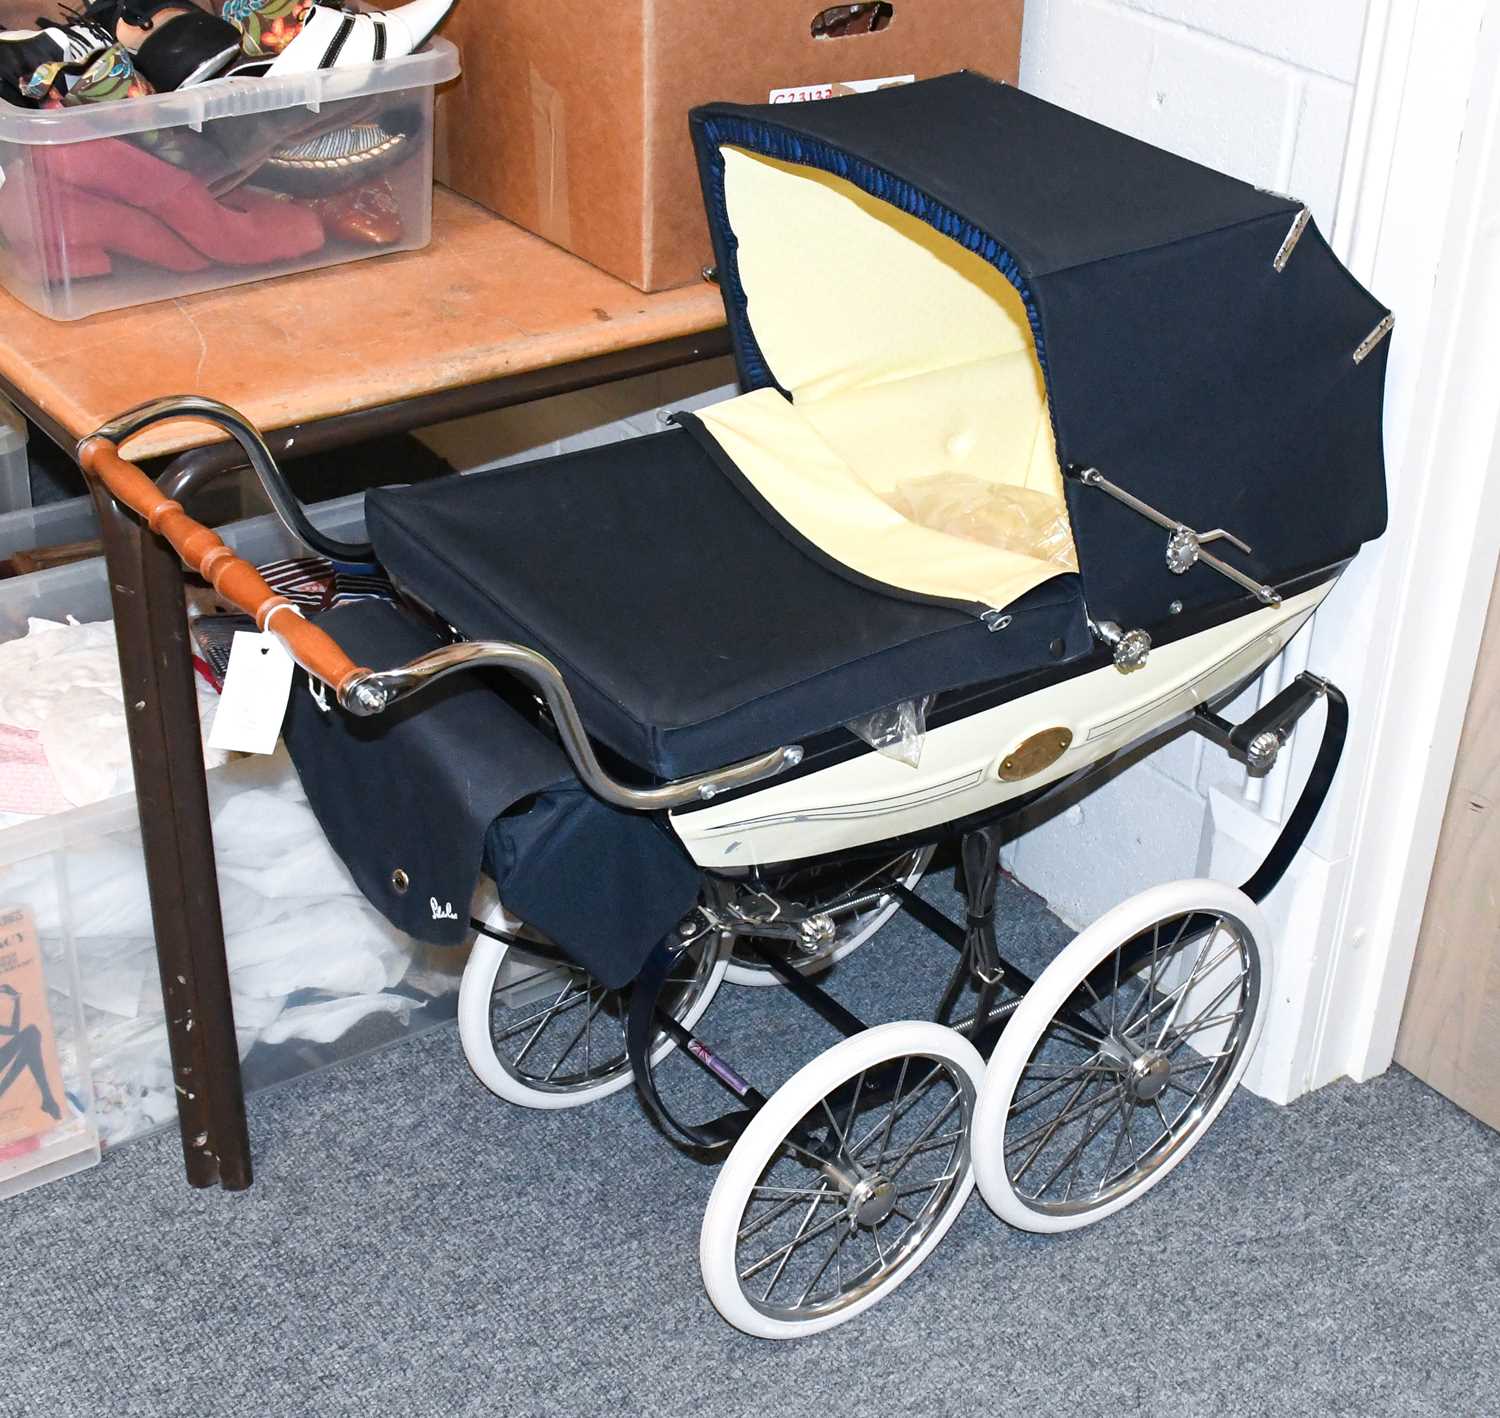 A Silver Cross "Millennium" Pram, numbered 0146, with pale yellow silk-type insert cushion and quilt